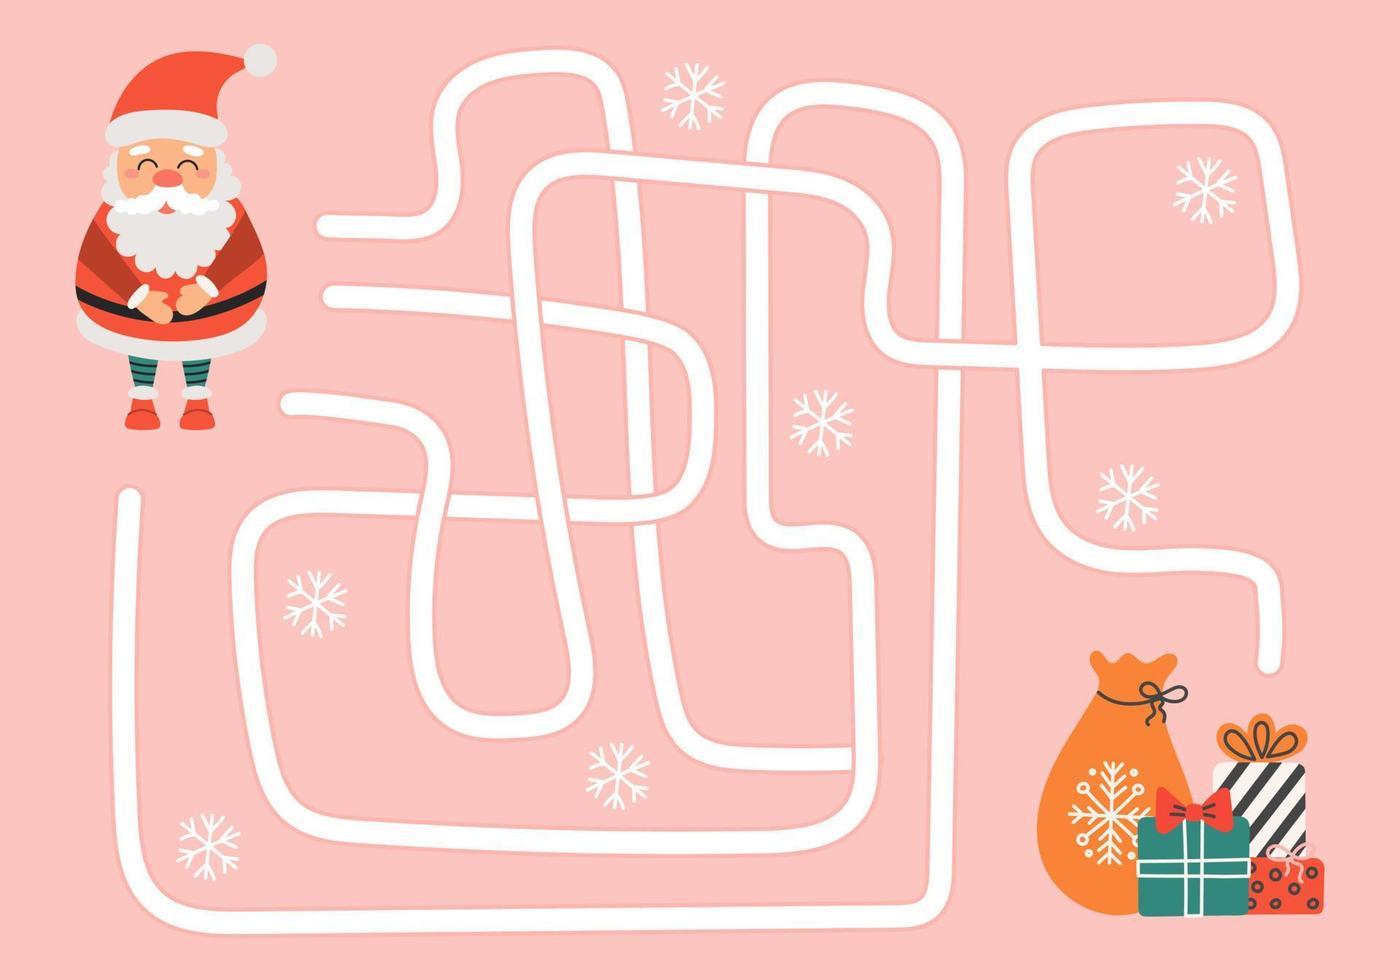 Labyrinth, help Santa Claus find the right way to Christmas gifts. Logical quest for children. Cute illustration for childrens books, educational game vector